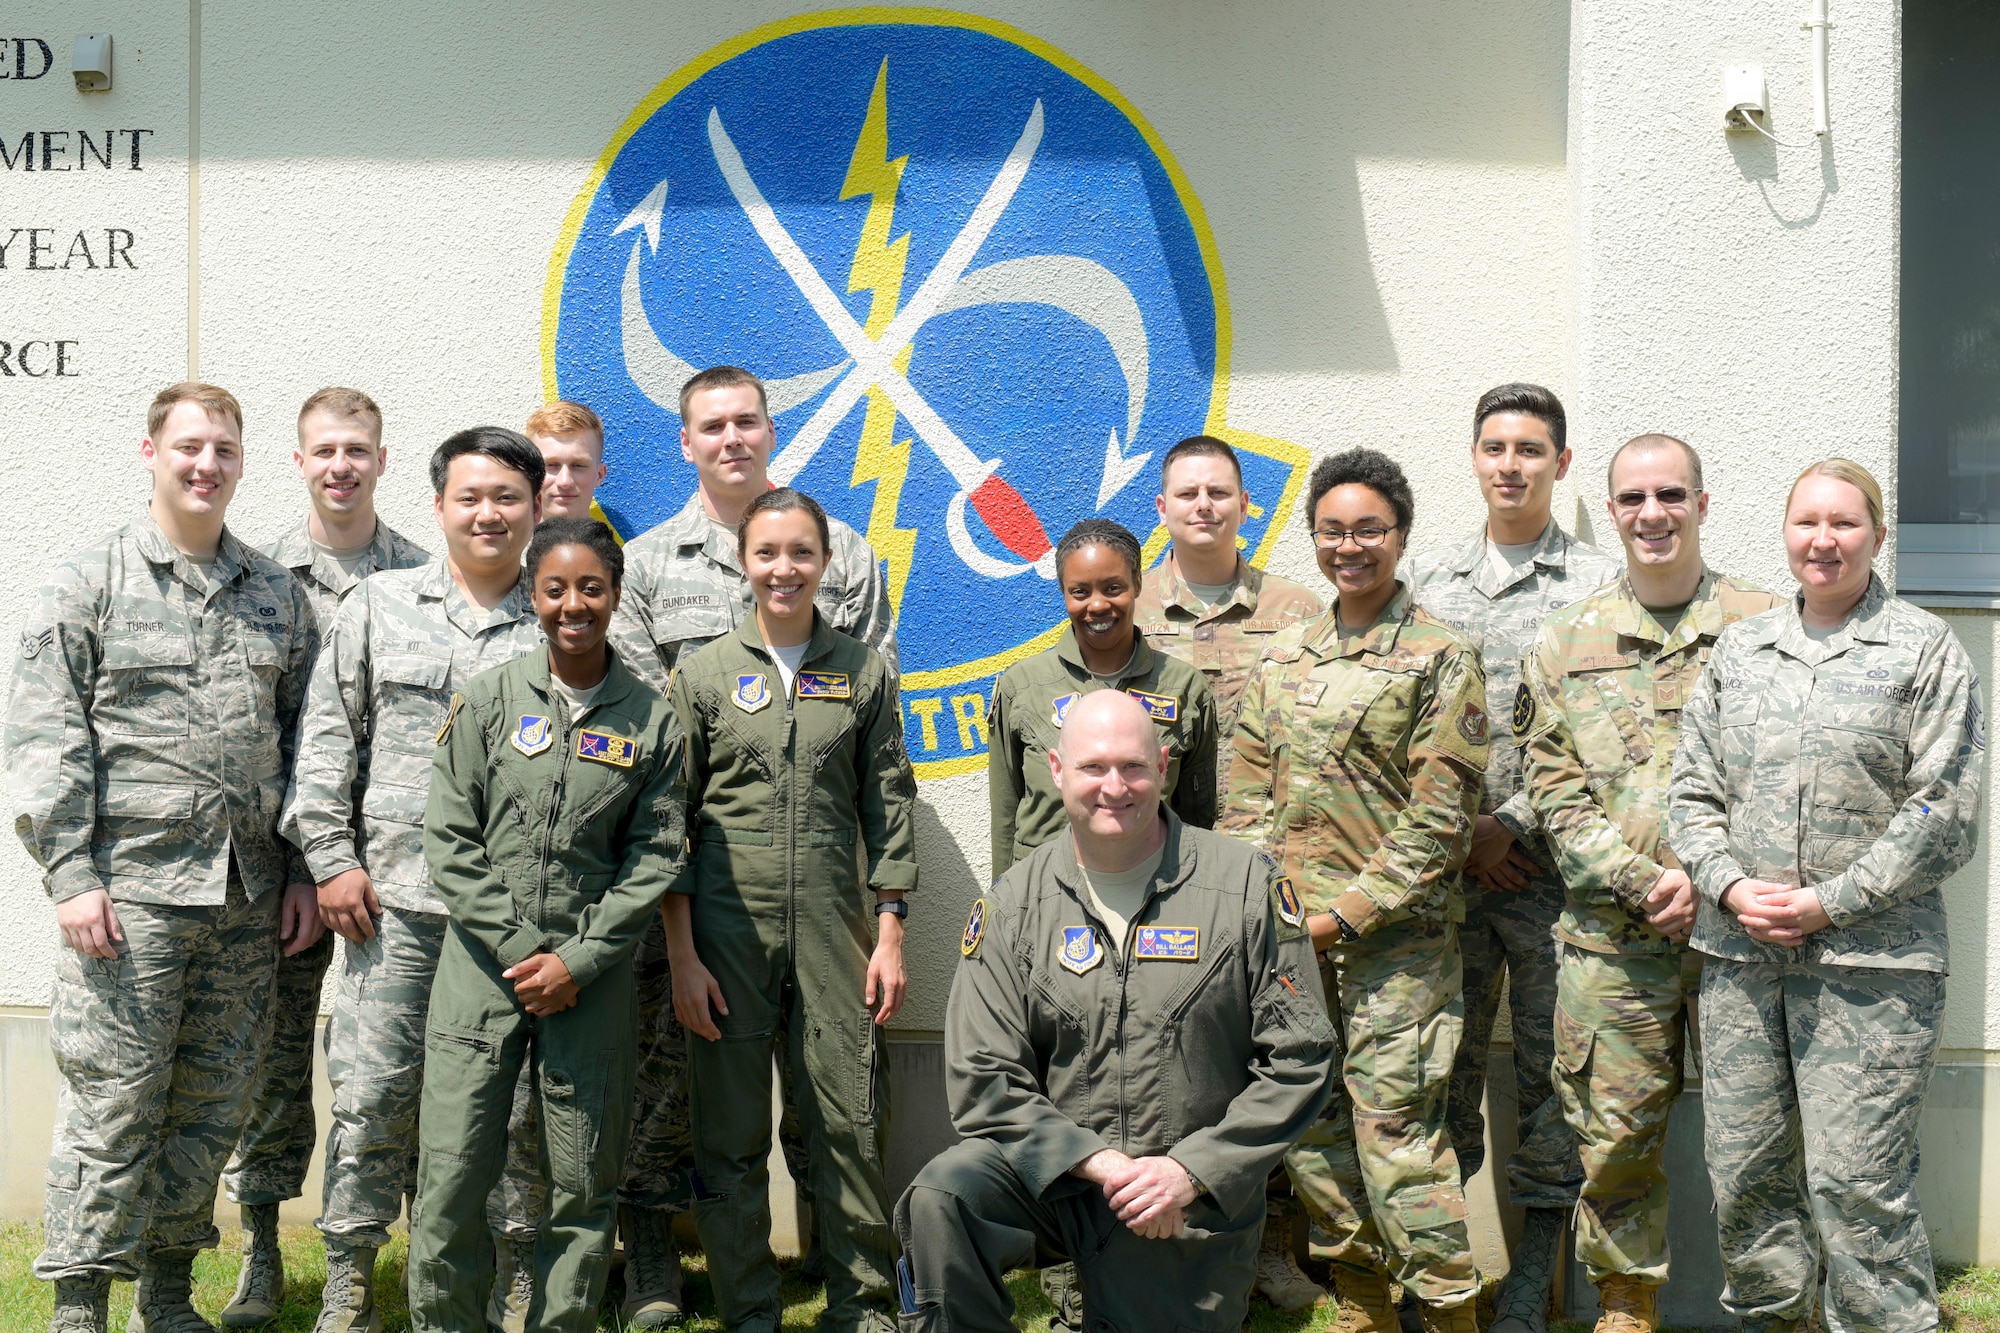 The U.S. Air Force 610th Air Control Flight pauses for a group photo at Misawa Air Base, Japan, July 31, 2019. The 610th ACF won two Headquarters Air Force-level awards in 2018 including the “Outstanding Ground-Based Battle Management Command and Control Crew.” Its mission ensured airspace safety for F-16 Fighting Falcon sorties by de-conflicting with multiple aircraft and providing pilots real-time feedback.